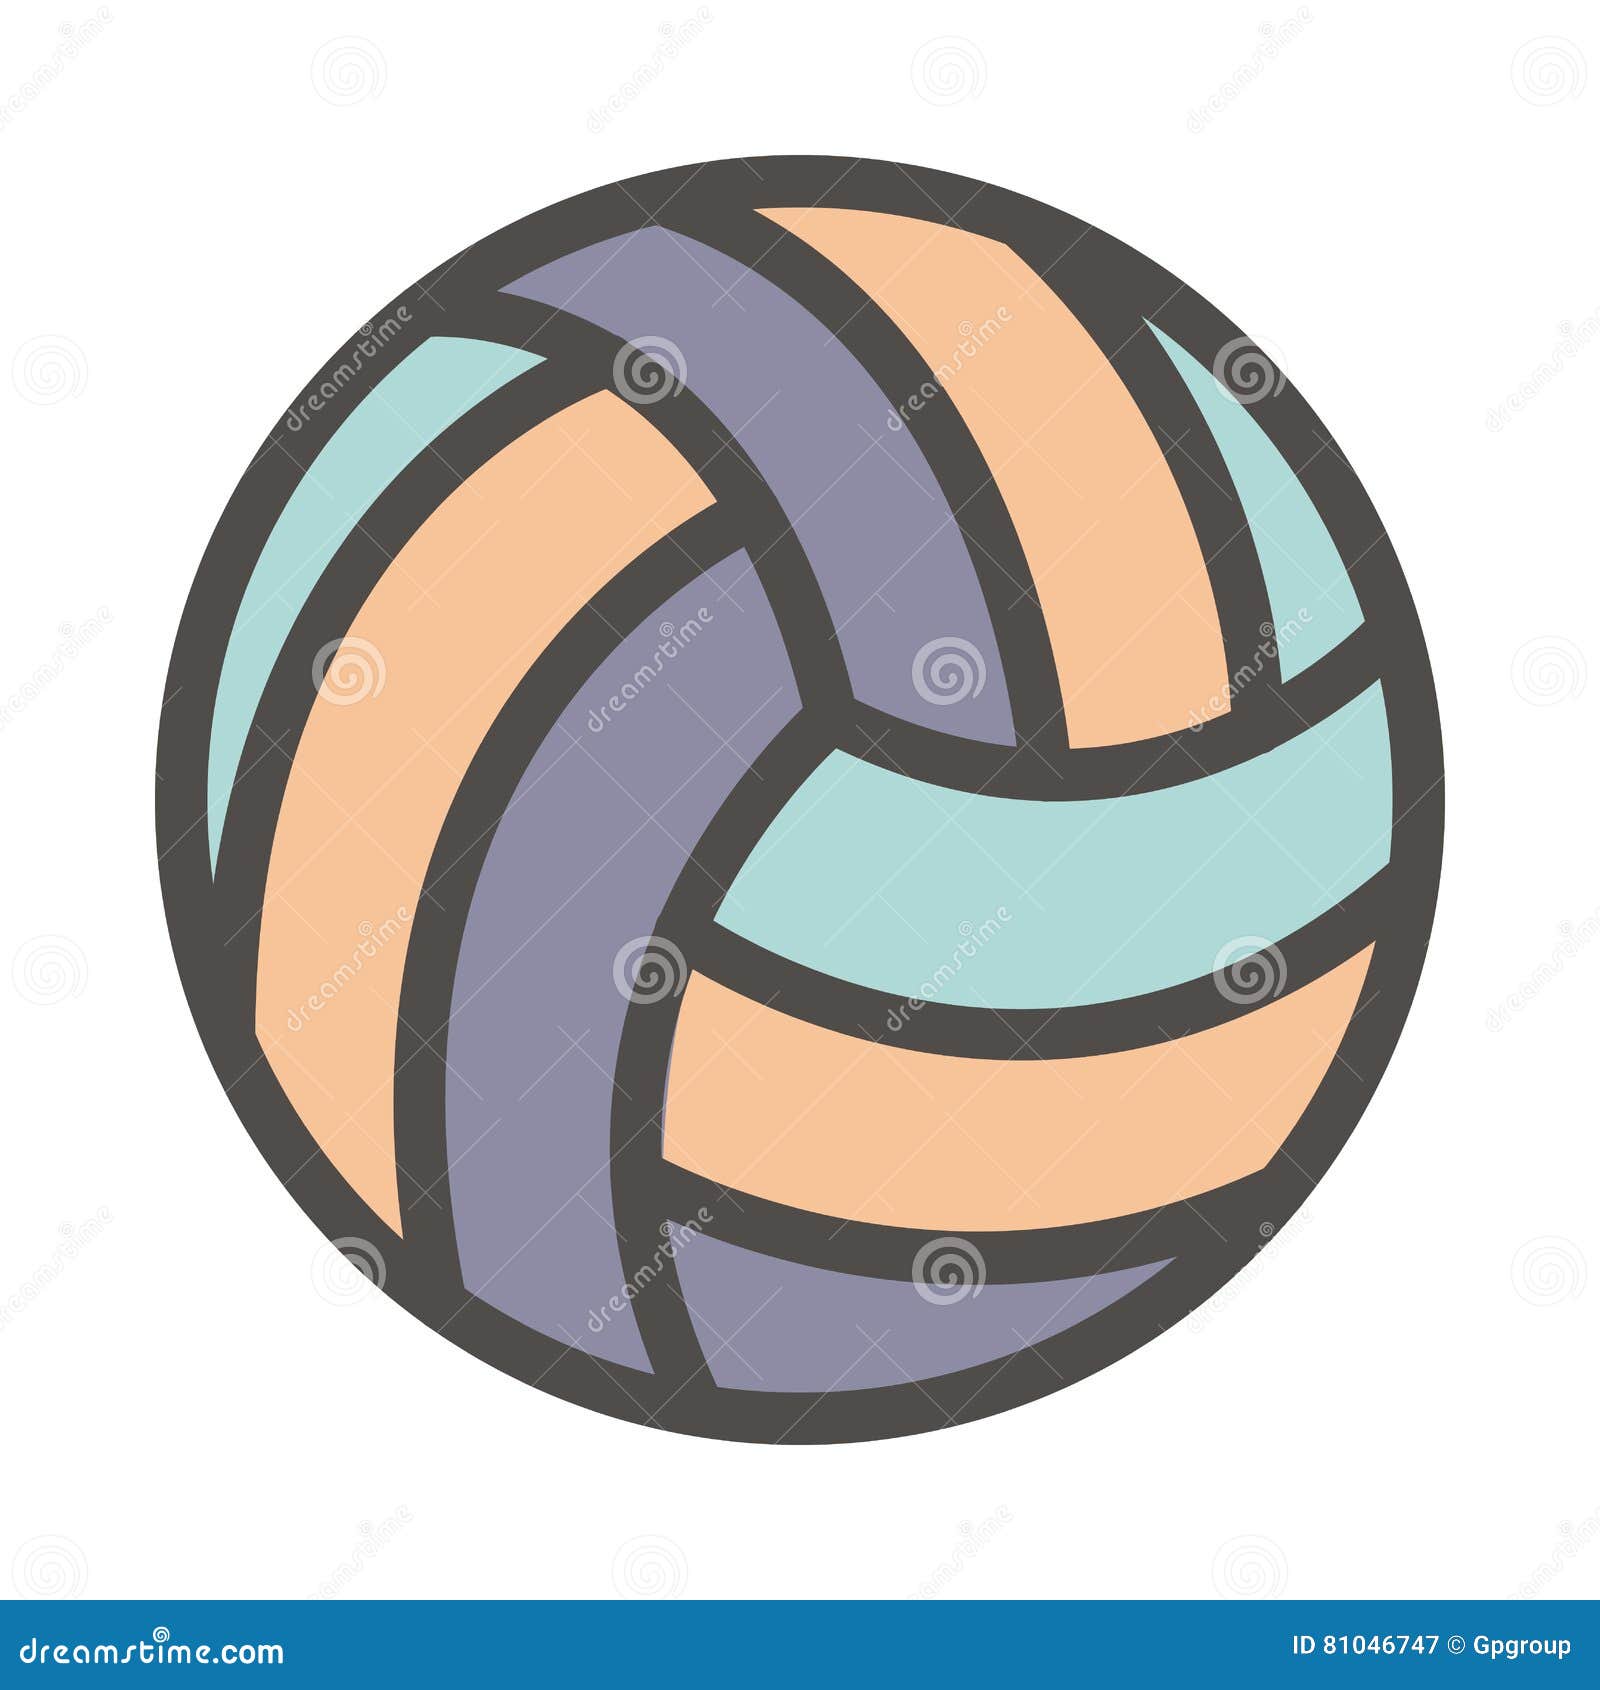 Ball of volleyball design stock vector. Illustration of fitness - 81046747